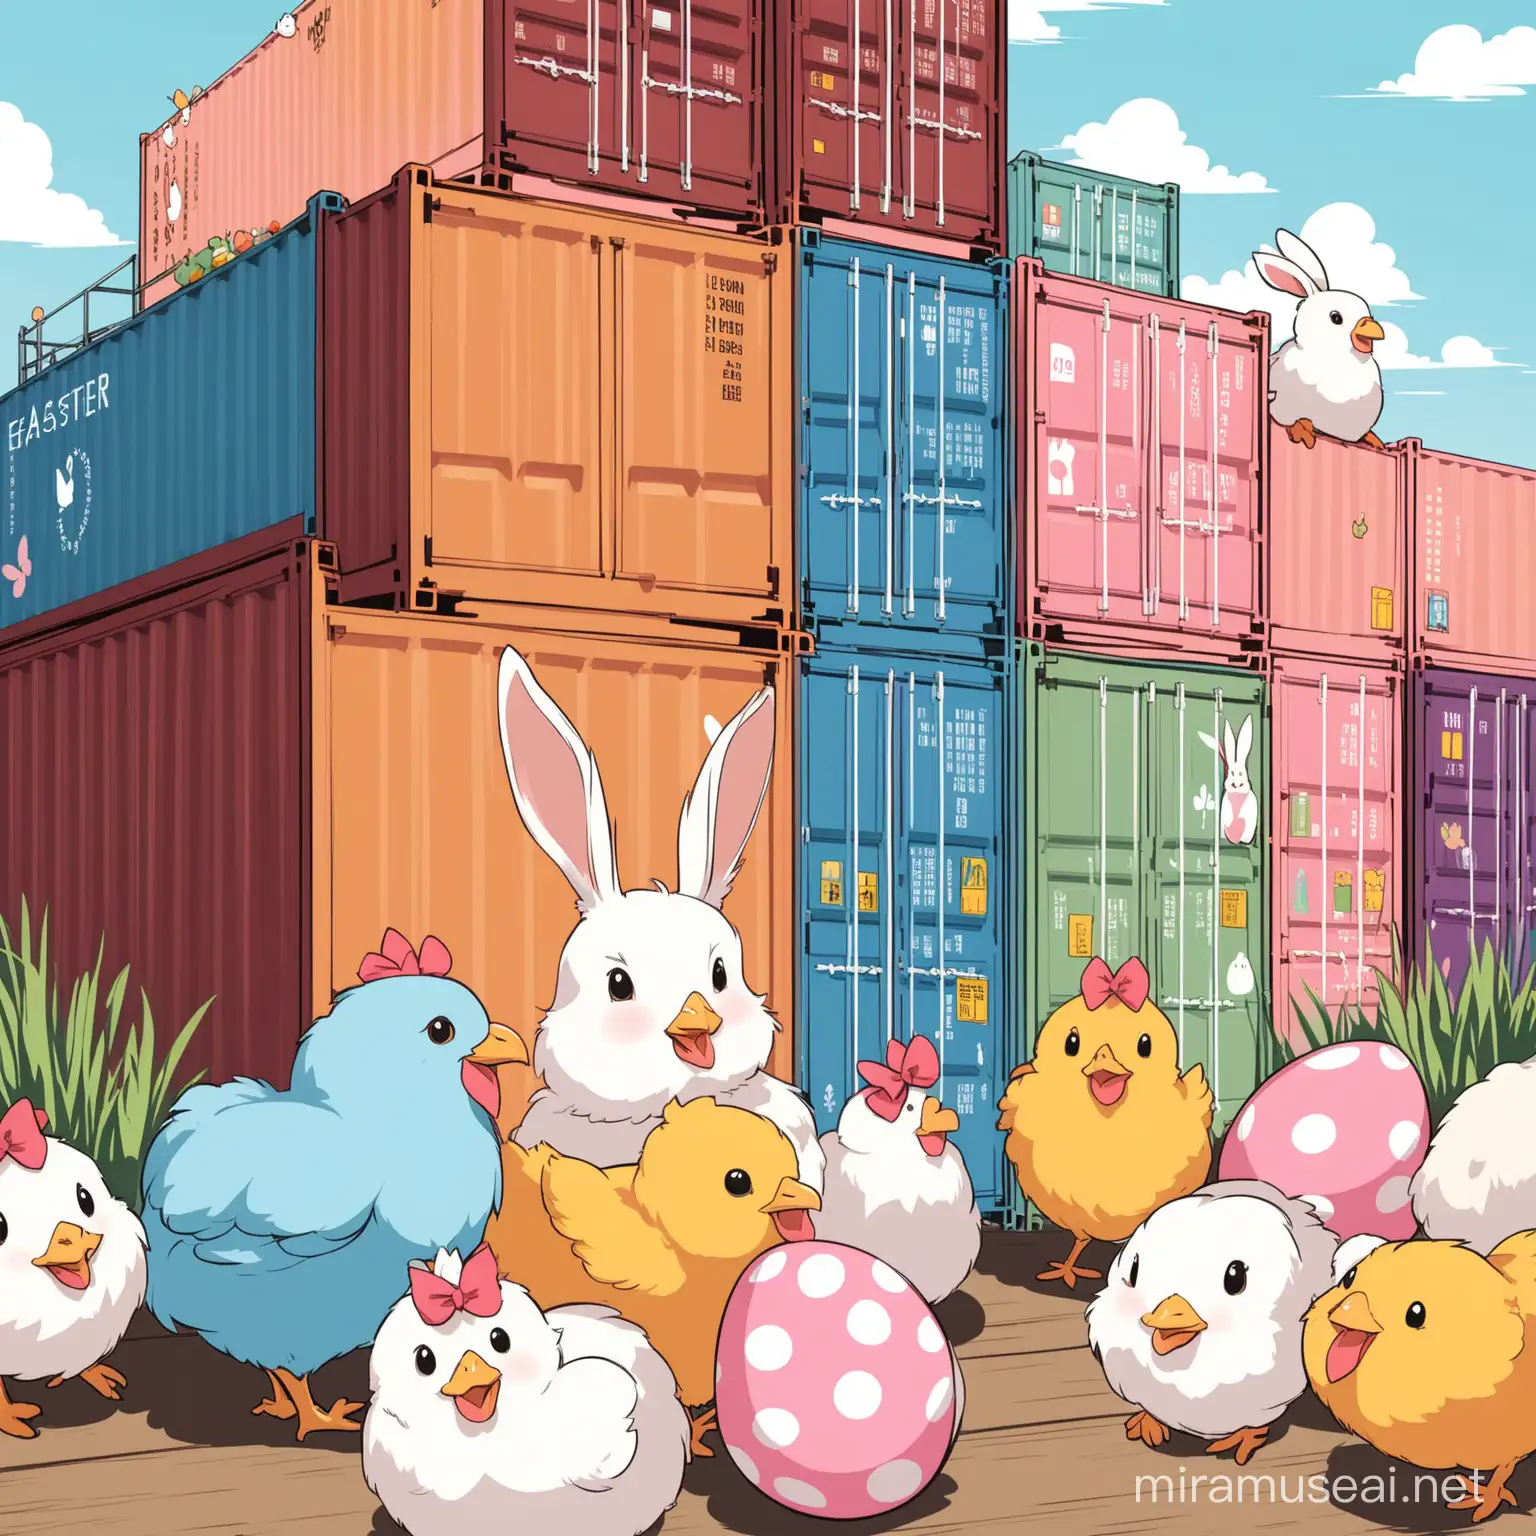 “Make an easter design on 20-foot shipping containers, stacked in a terminal. include chickens, eggs and bunnies.”